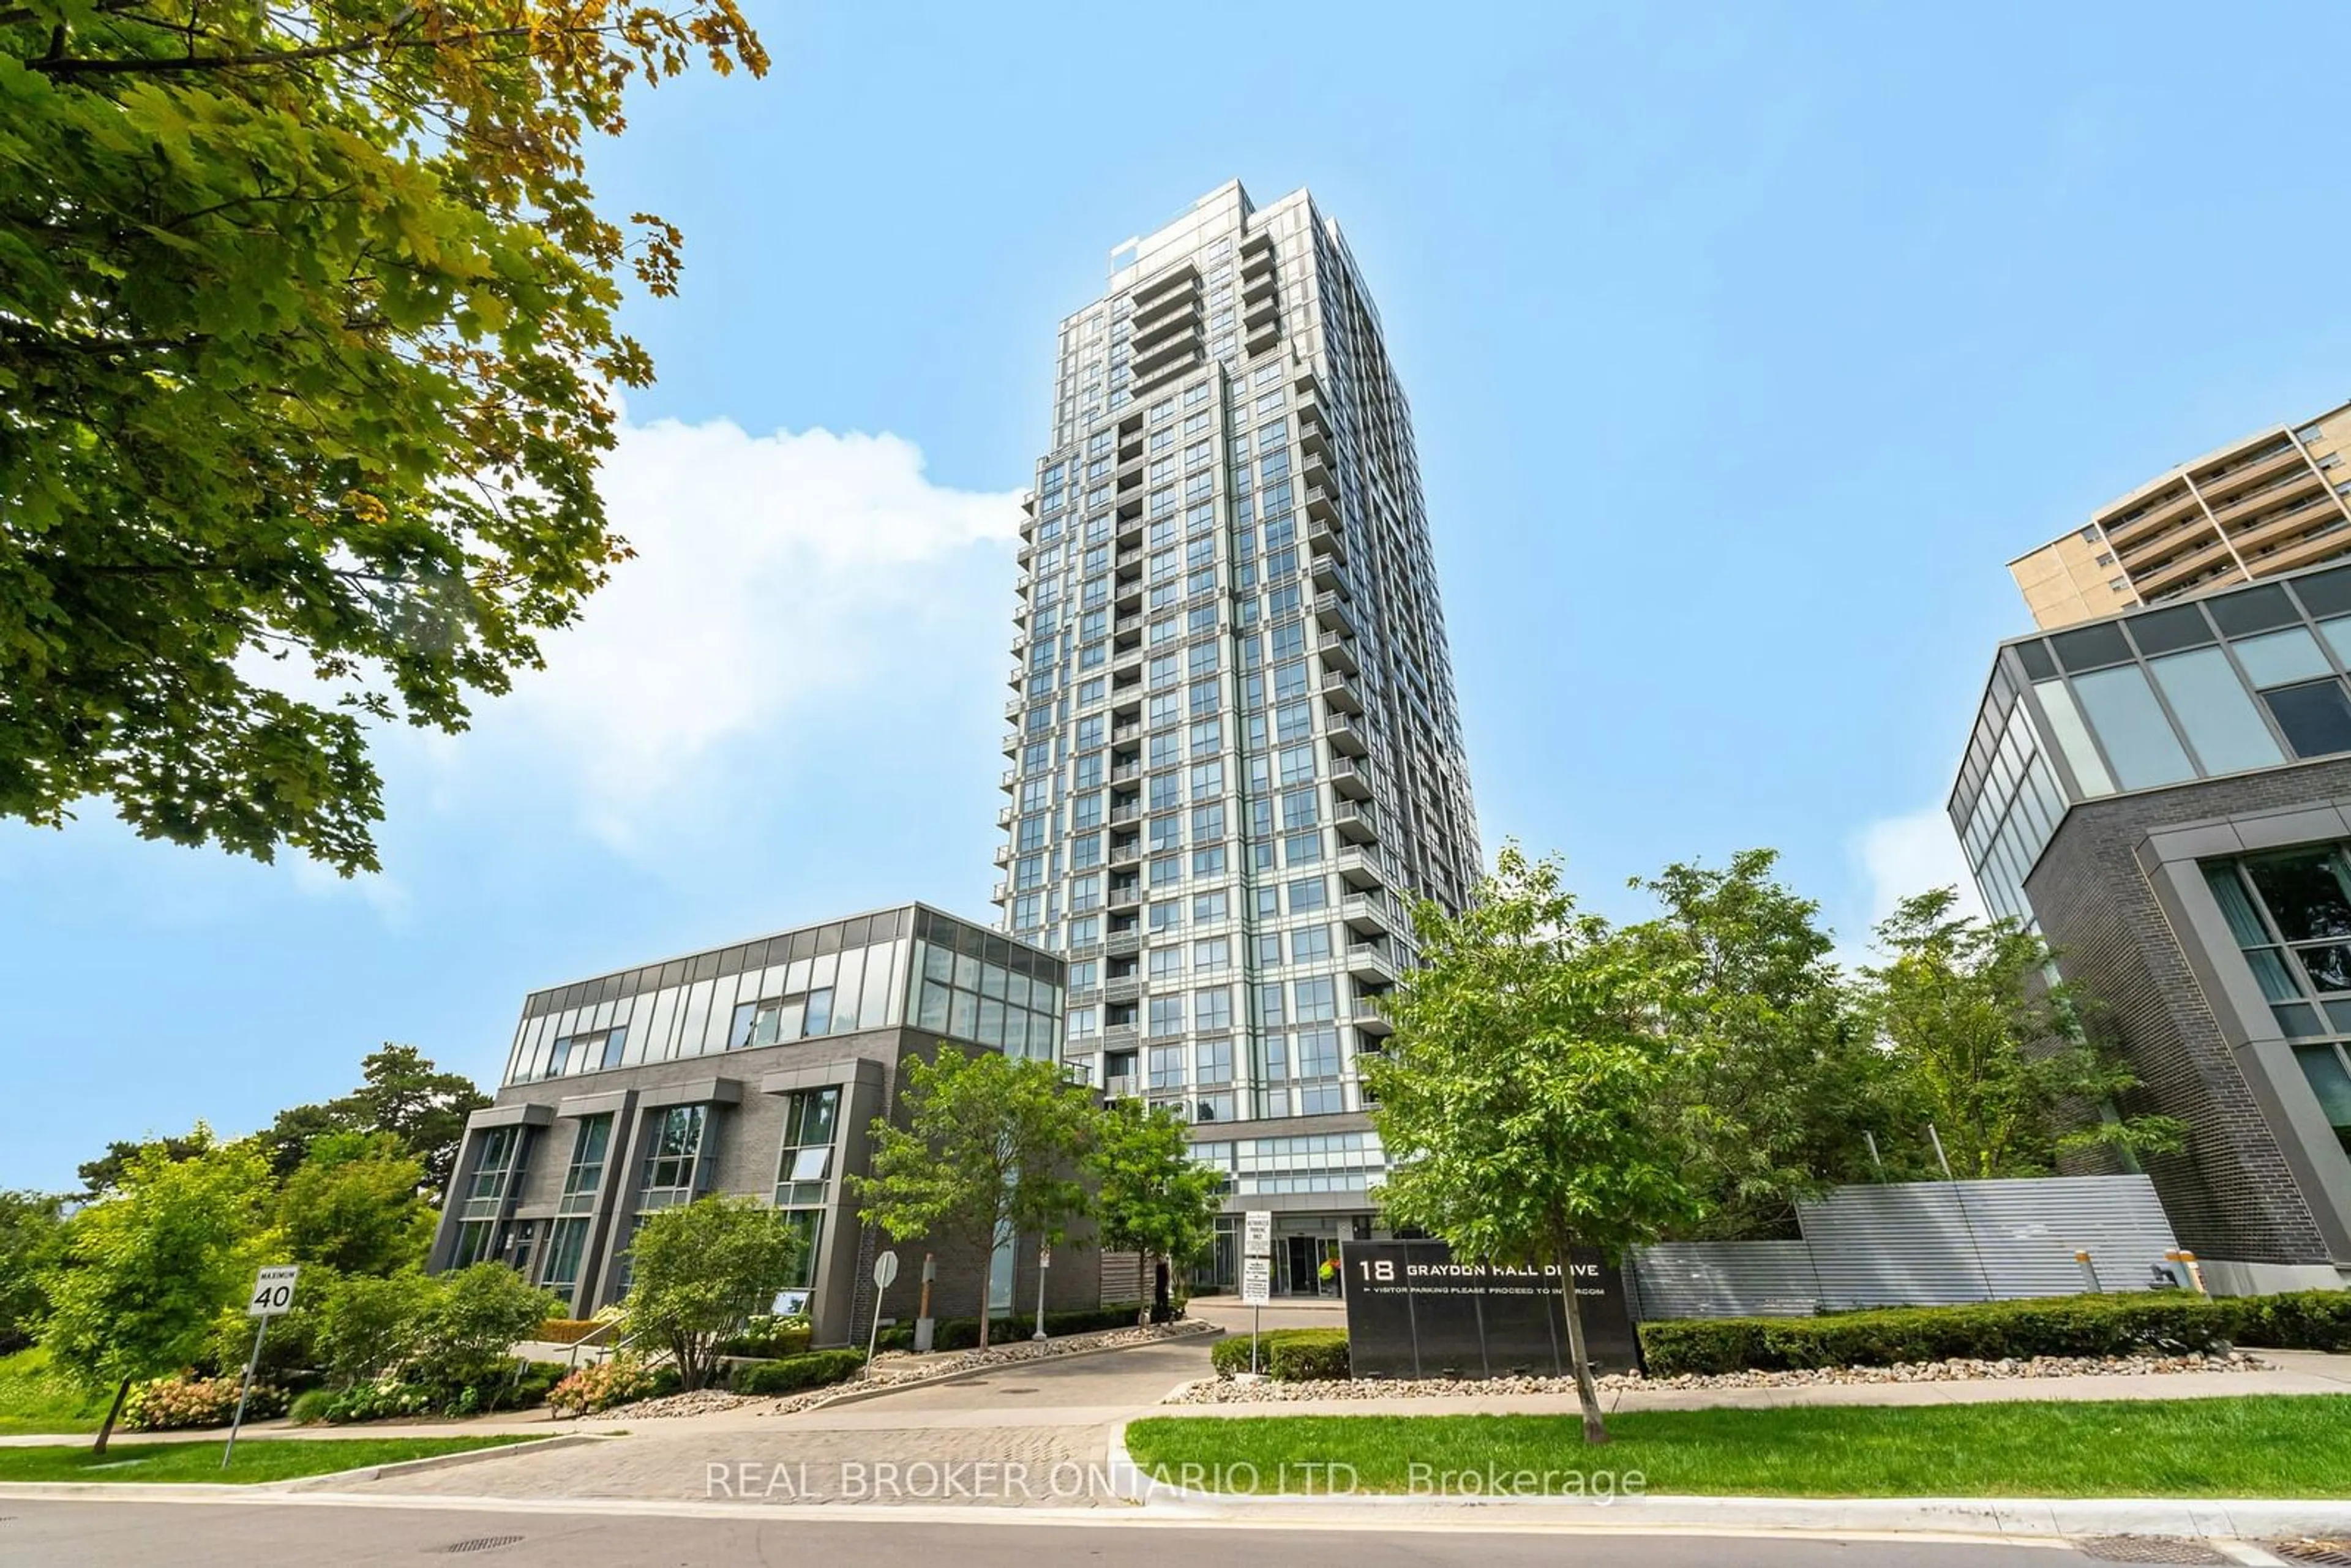 A pic from exterior of the house or condo for 18 Graydon Hall Dr #703, Toronto Ontario M3A 0A4